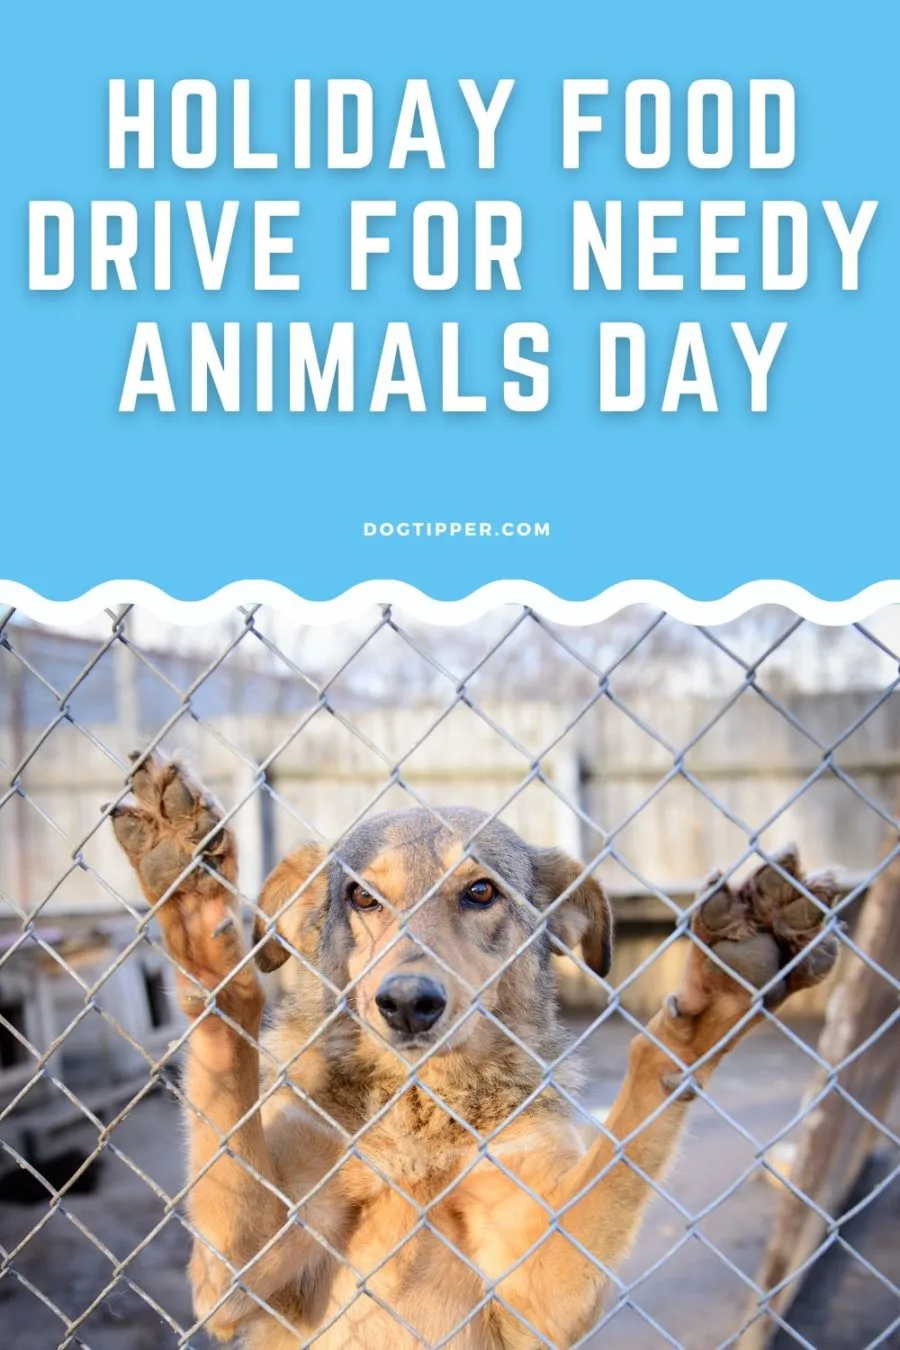 Holiday Food Drive for Needy Animals Day